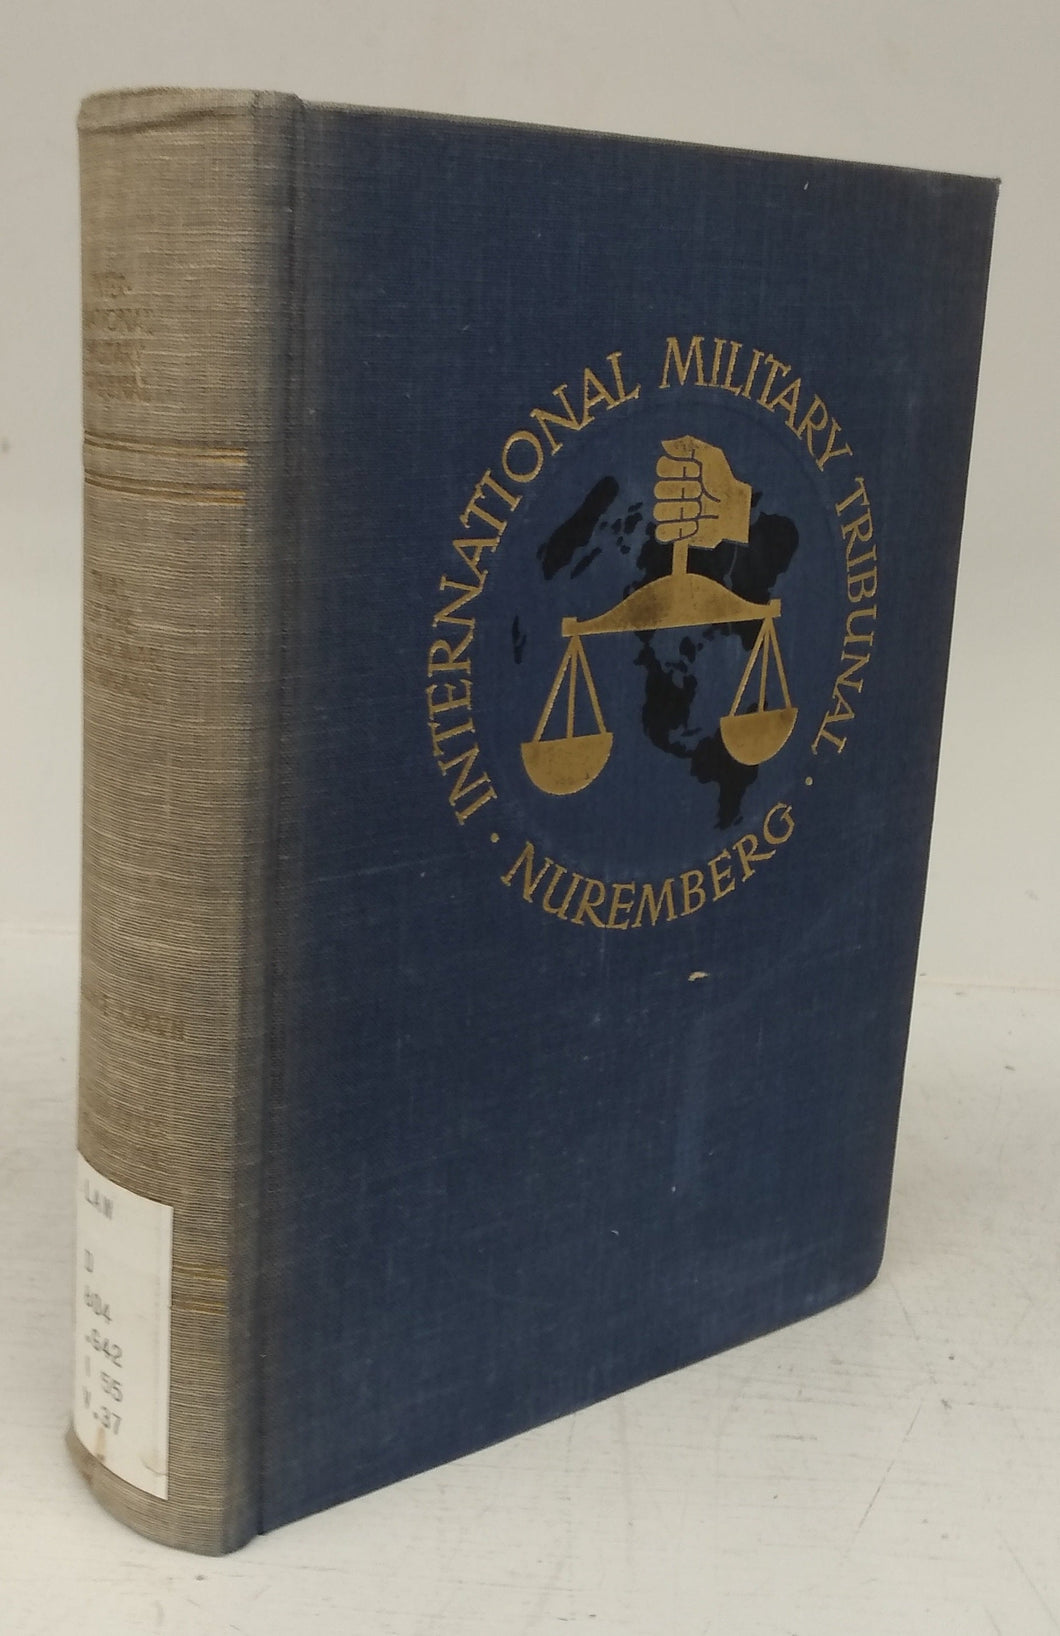 Trial of the Major War Criminals before the International Military Tribunal, Nuremberg, 14 November 1945 - 1 October 1946 (Volume XXXVII - Documents and Other Material in Evidence Nos 12257-F to 180-L)